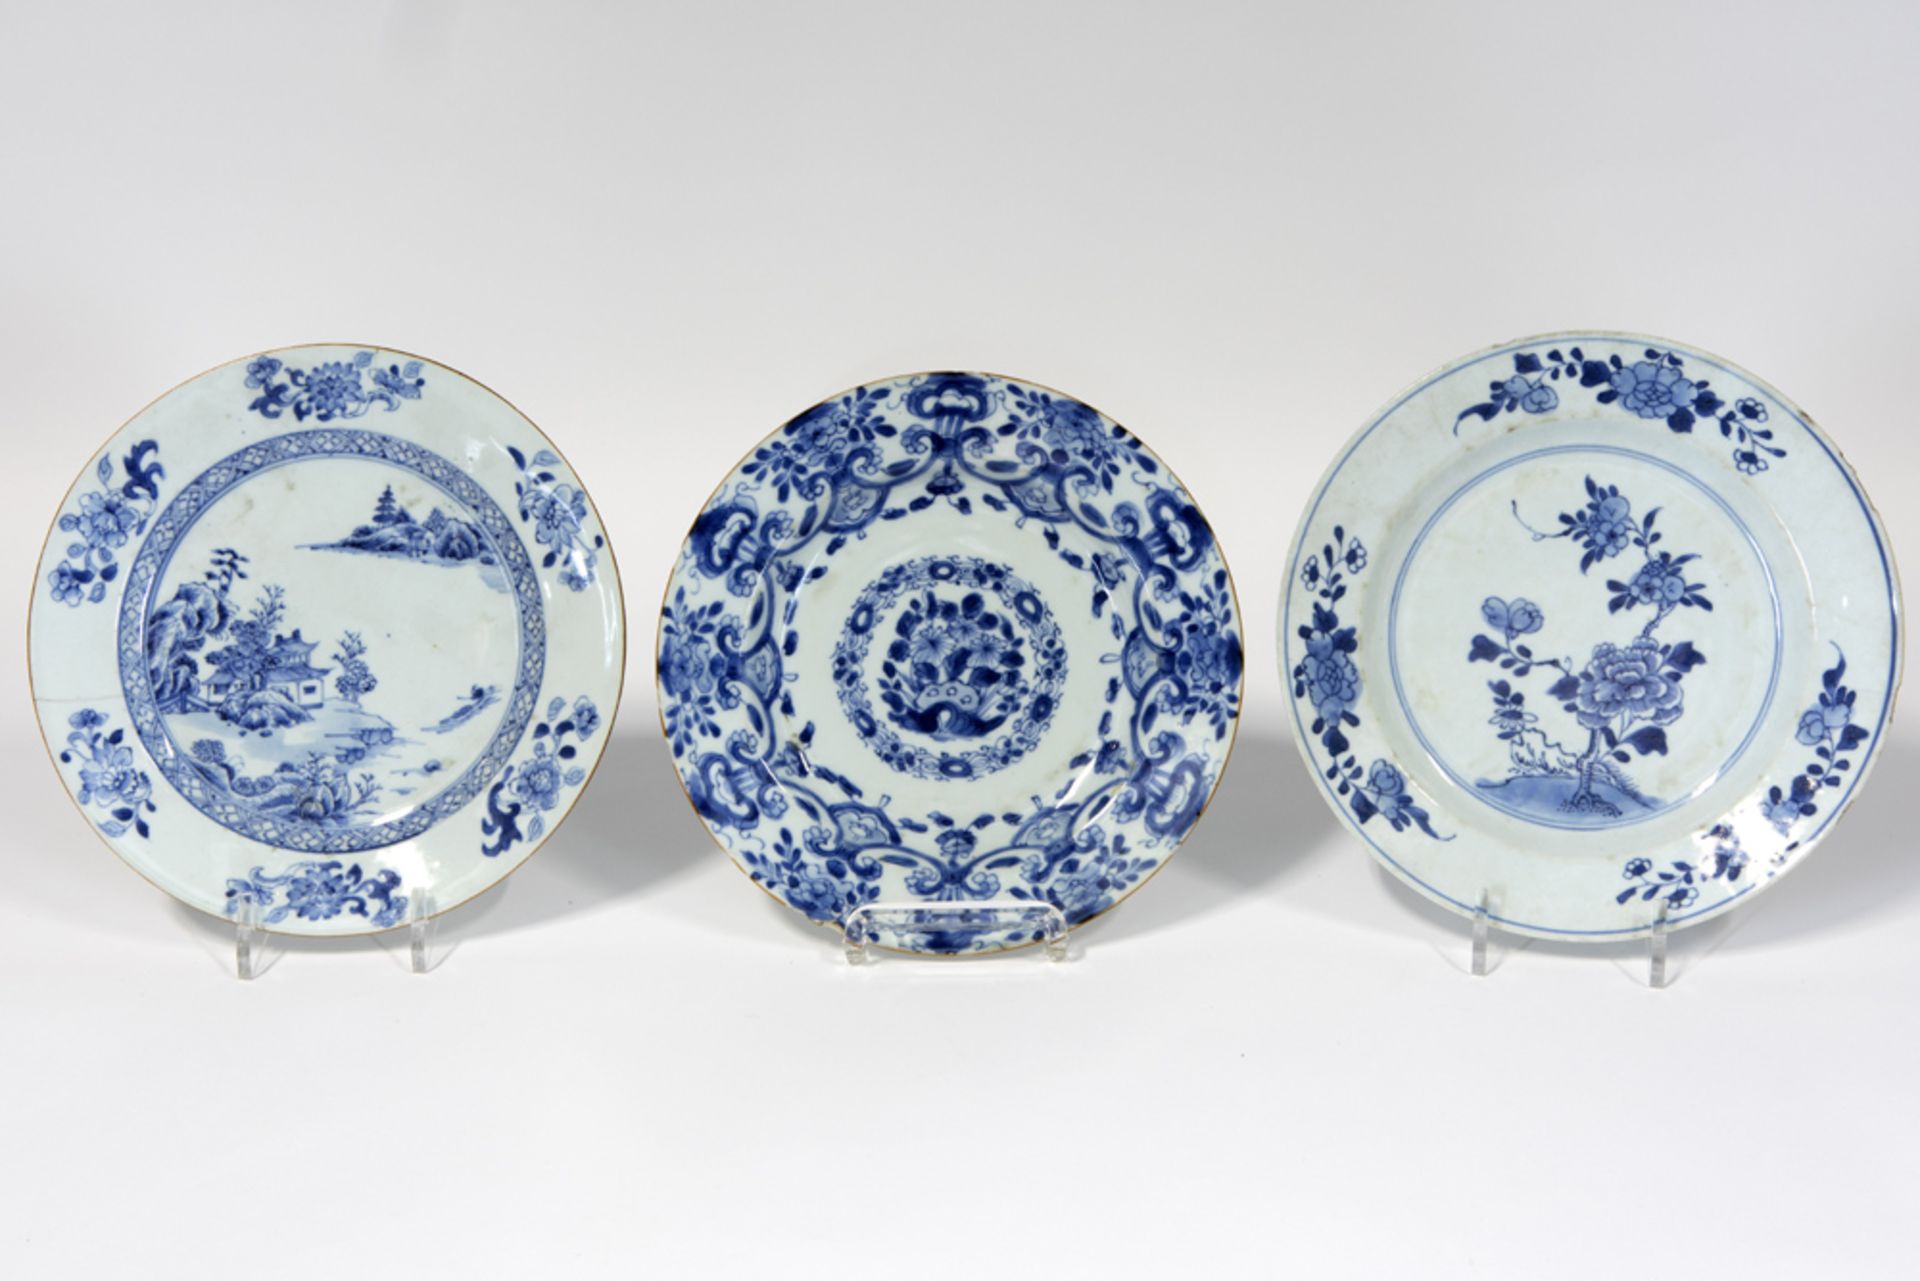 three 18th Cent. Chinese plates in porcelain with blue-white decors || Drie achttiende eeuwse